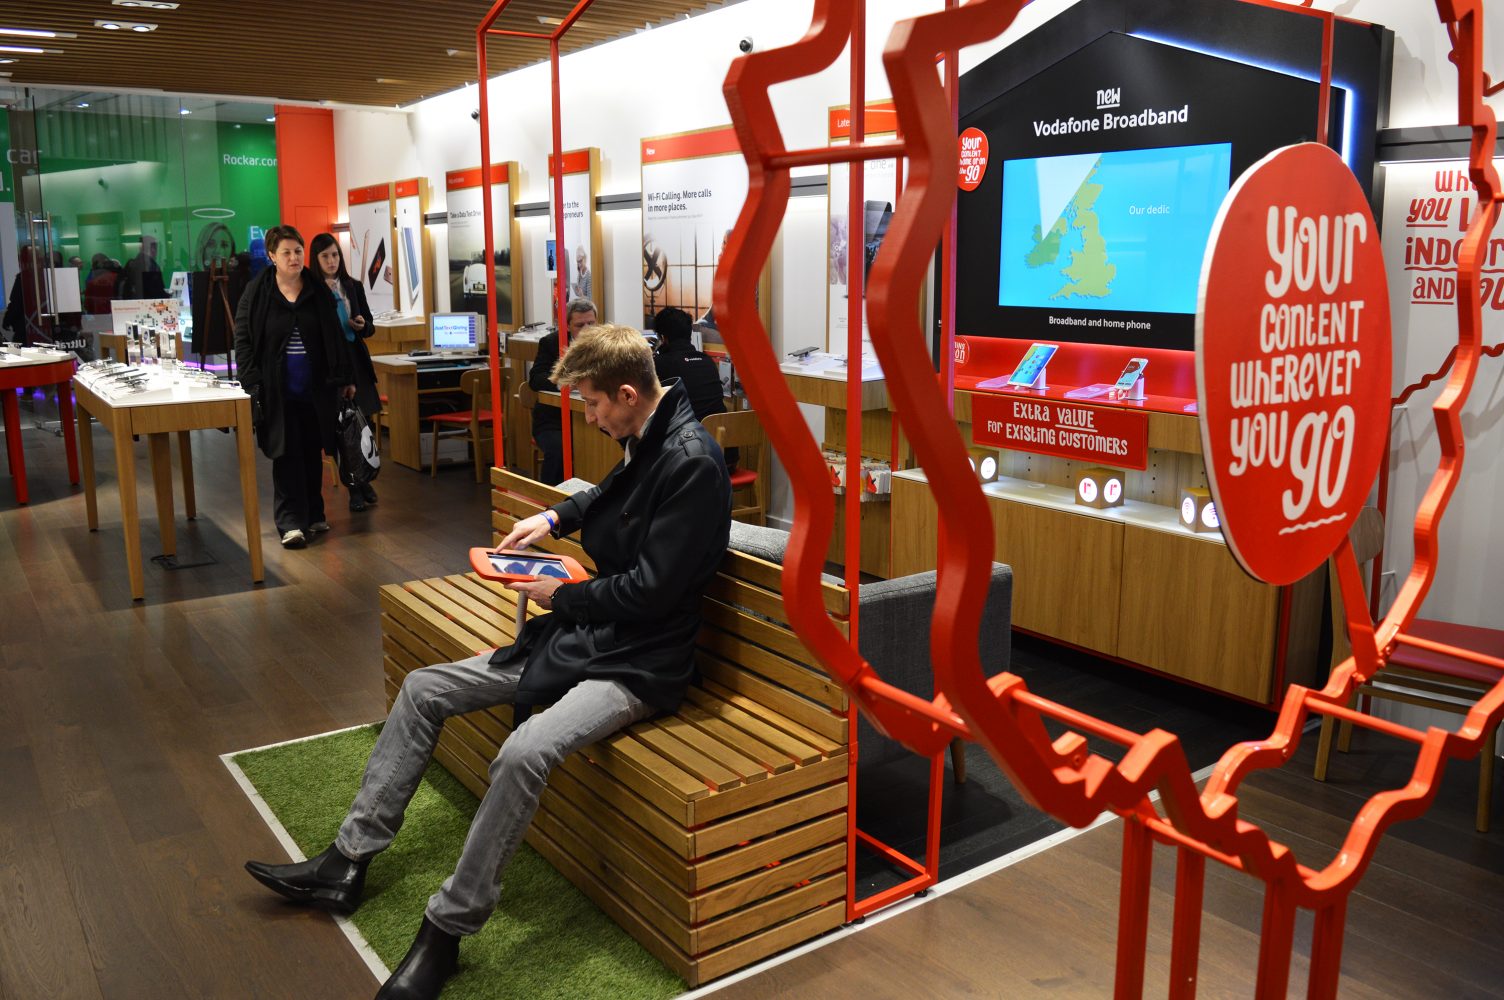 Customer sitting down on bench and using ipad. Vodafone Quad Play, Retail Store and Service Design by Household.